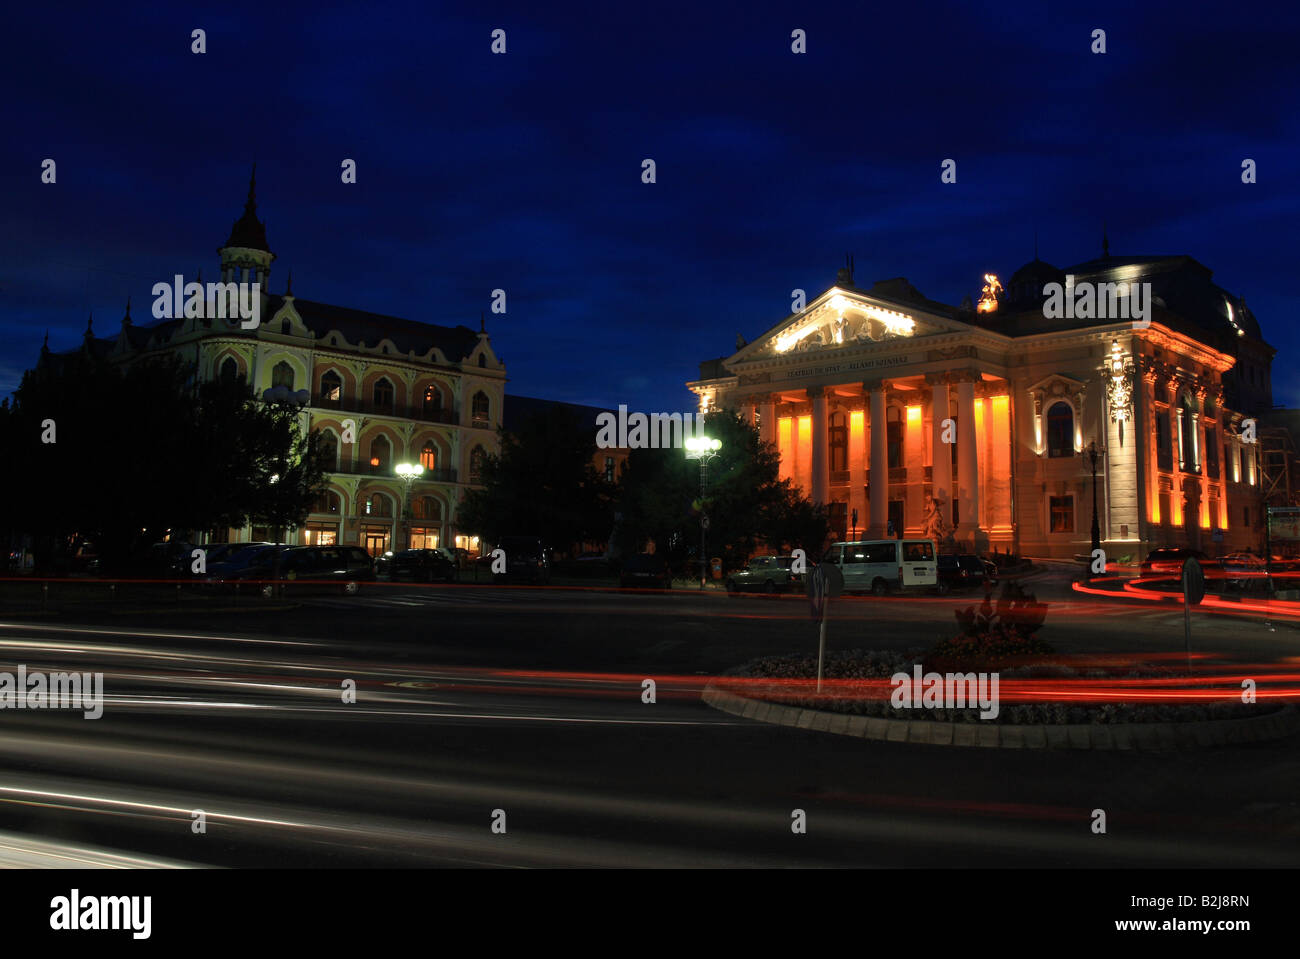 The theatre building and the Astoria palace from Oradea, Romania Stock Photo